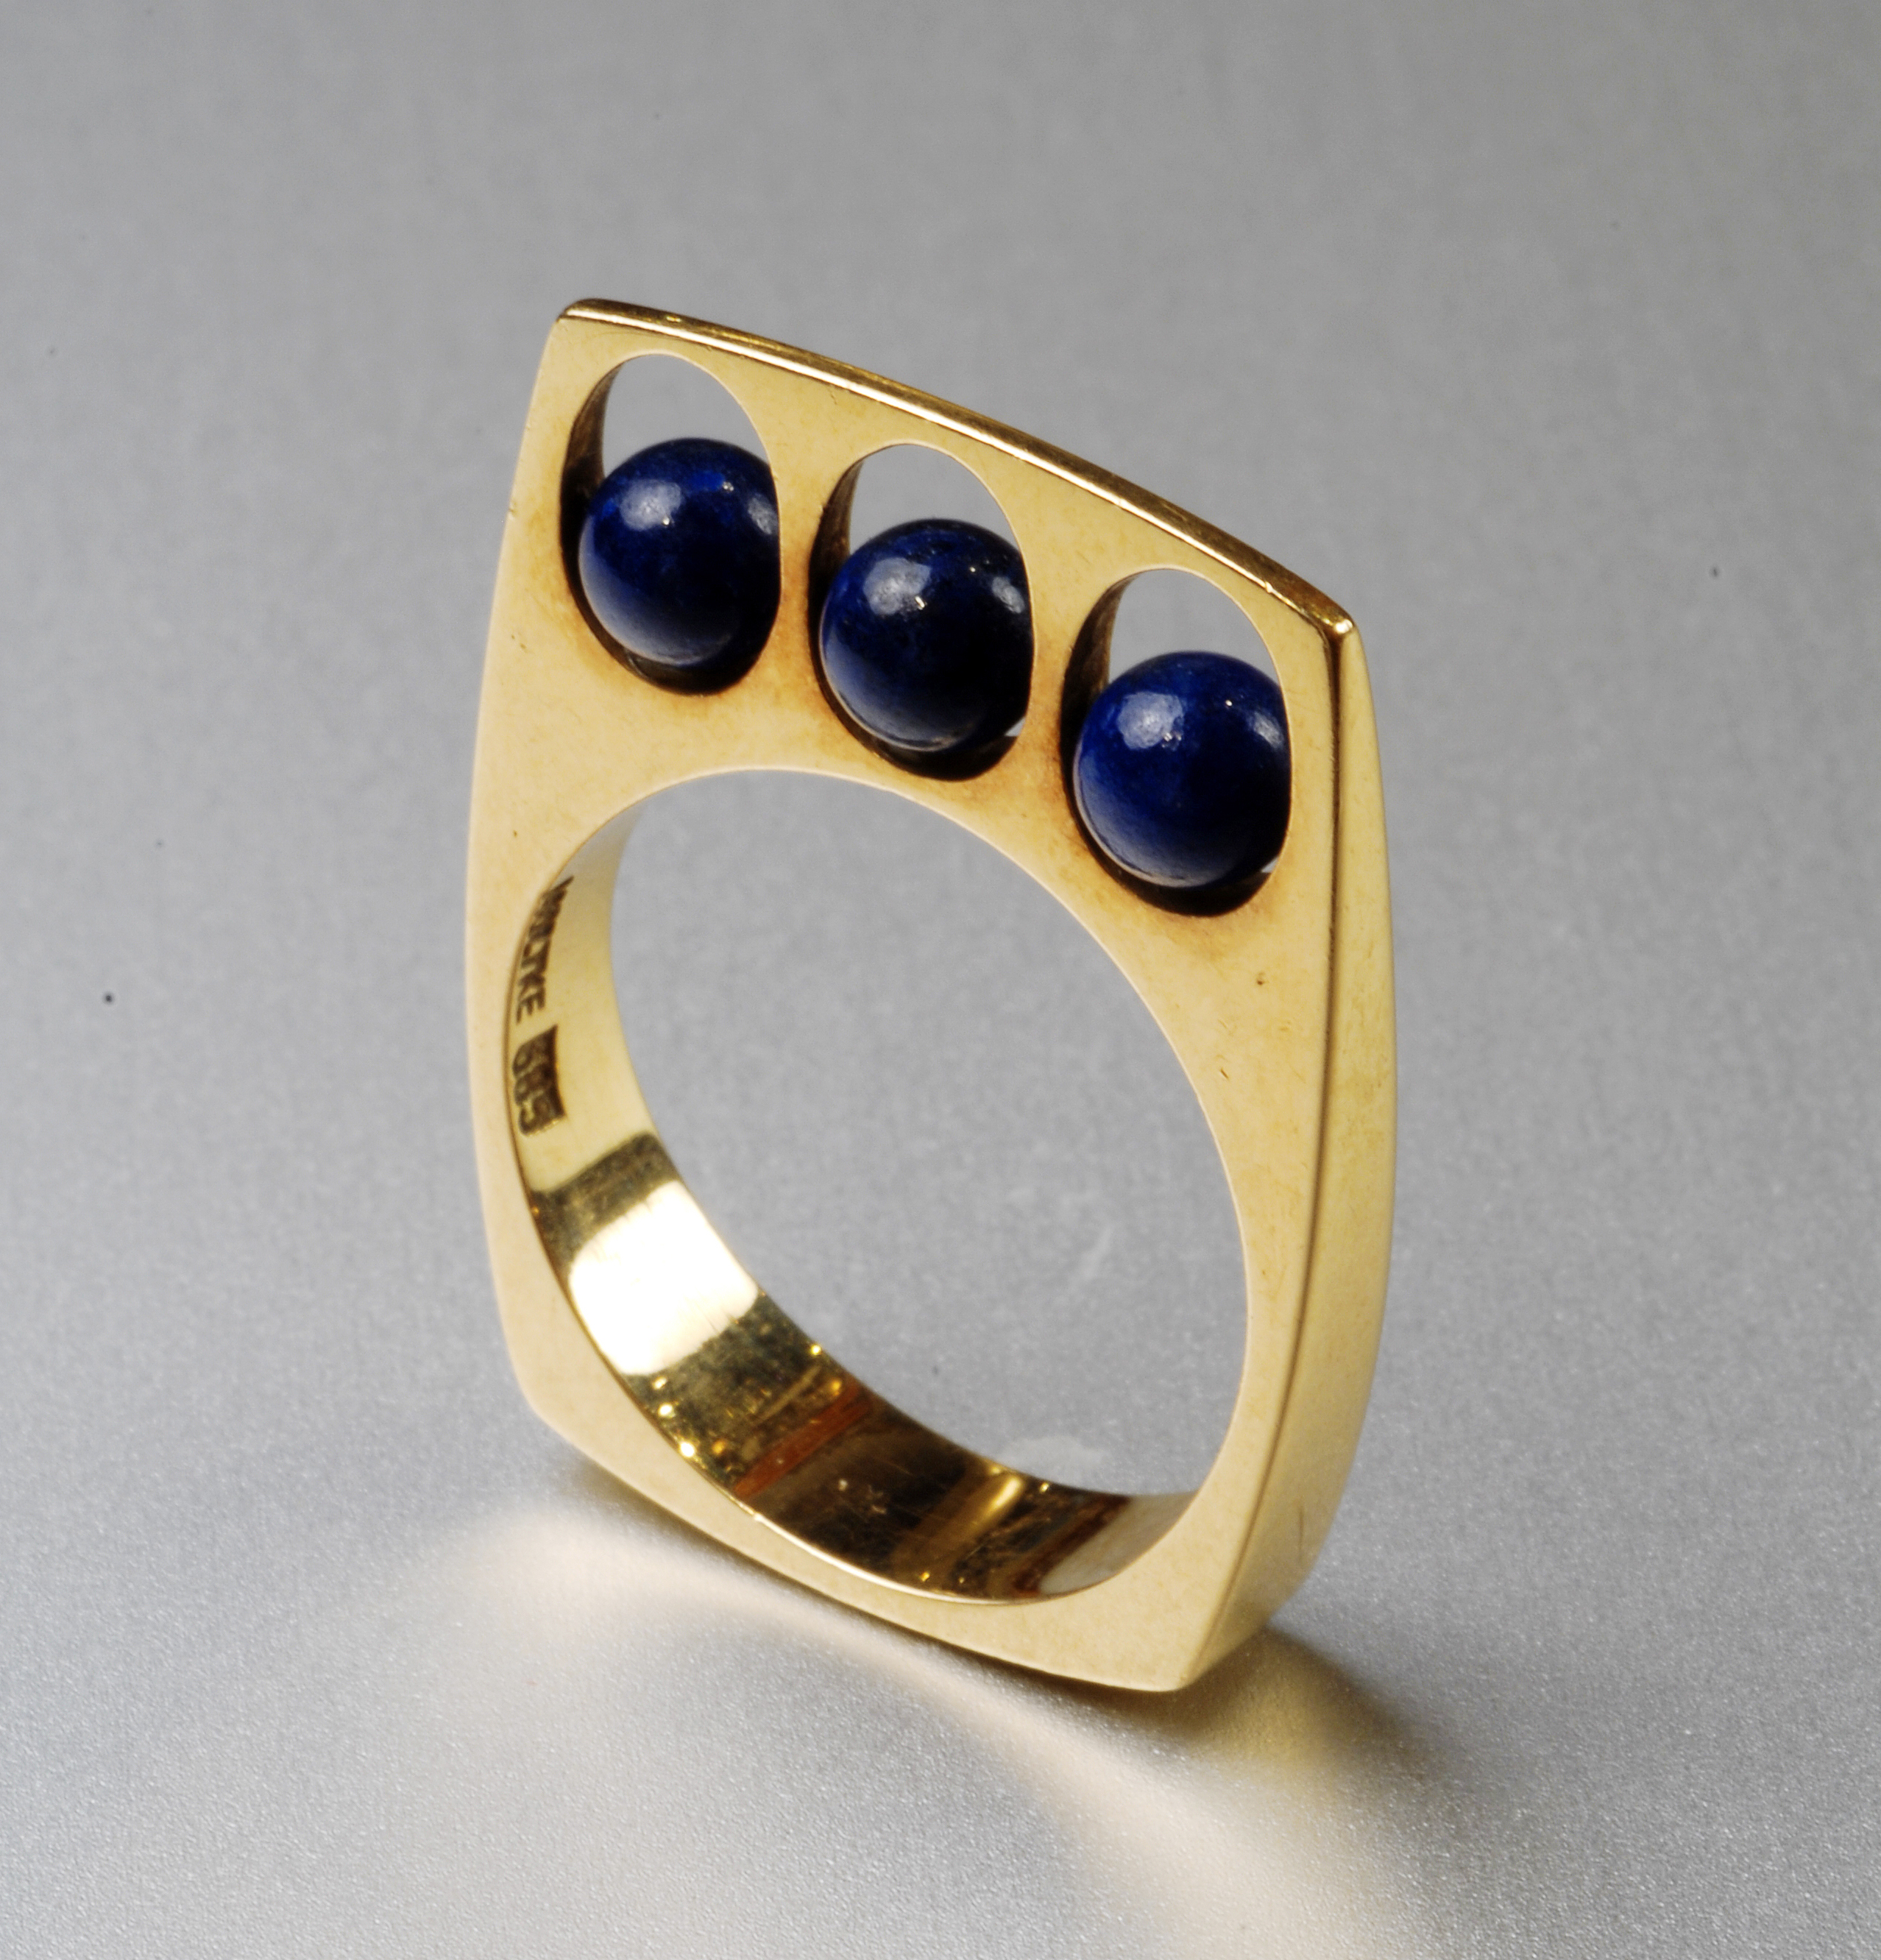 Greve Moltke, Architectural ring, 14 K yellow gold mounted with three lapis lazulis spheres, signed, 1983